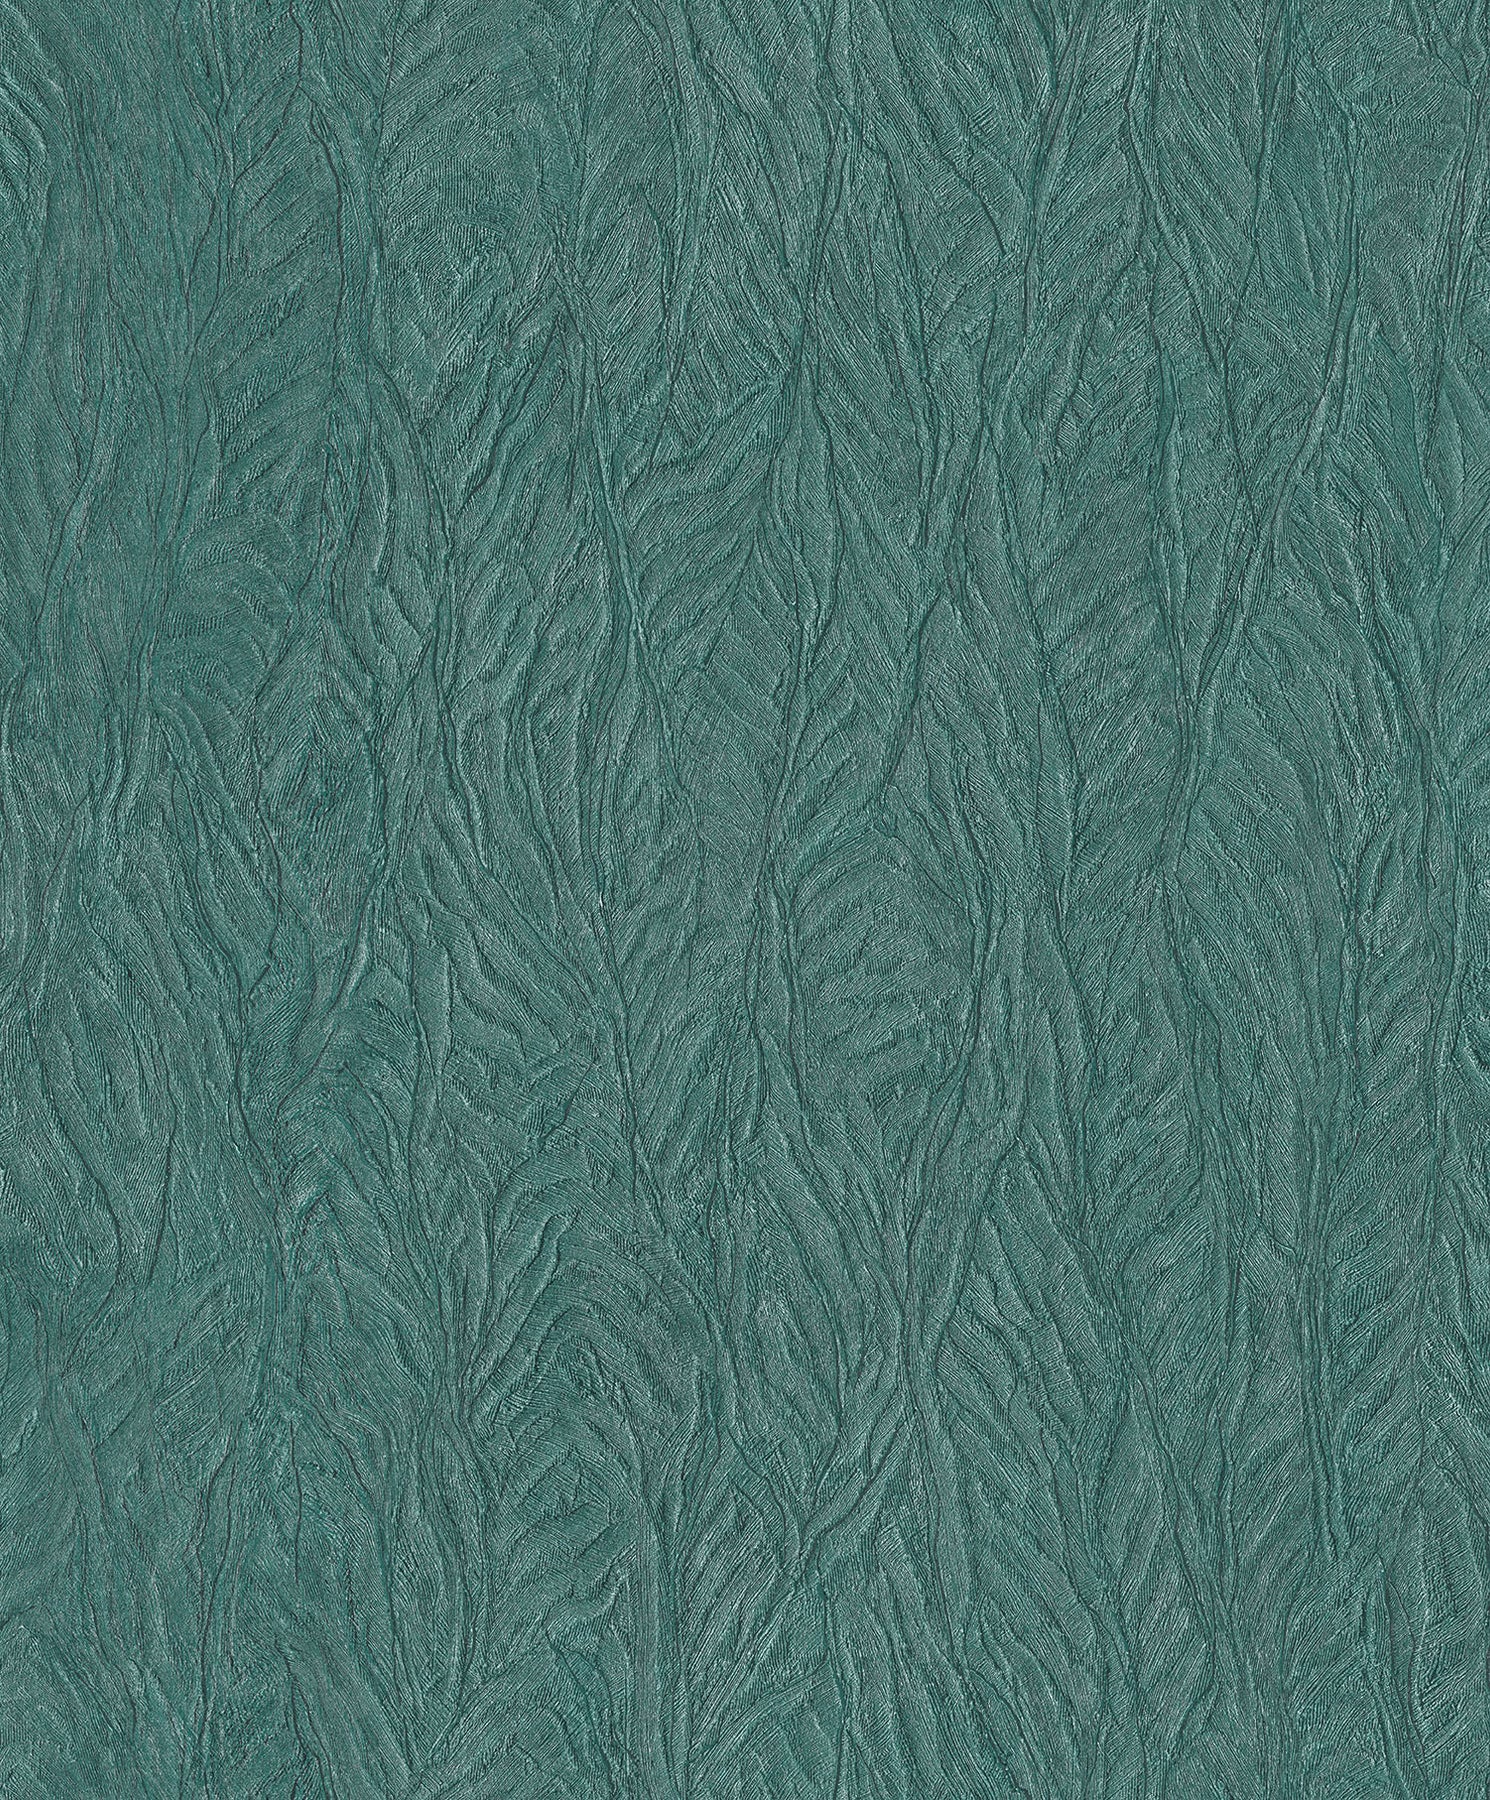 Leaf Emboss Wallpaper in Turquoise from the Ambiance Collection